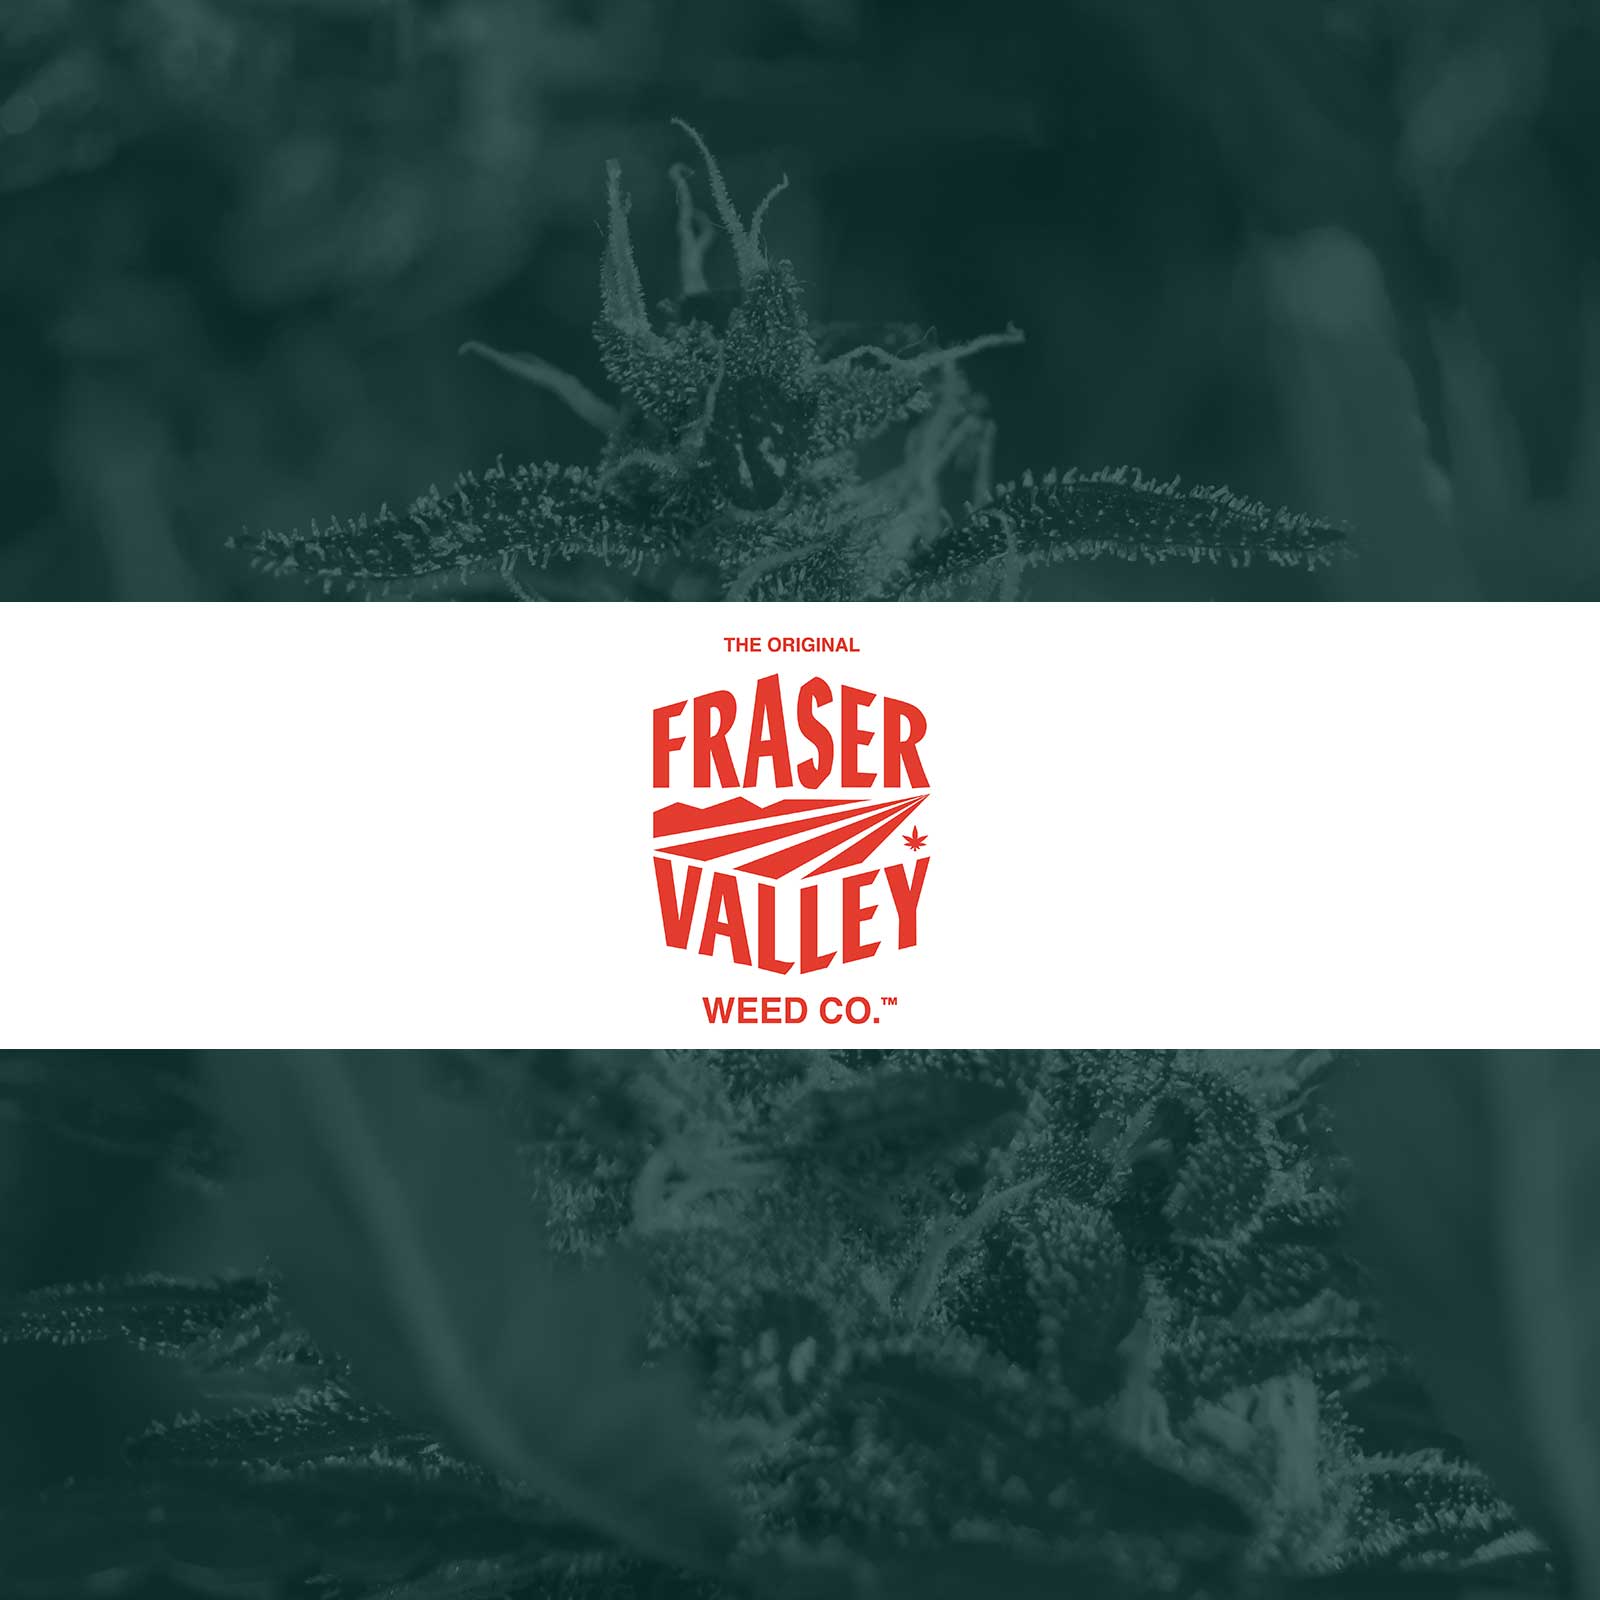 The Original Fraser Valley Weed Co.